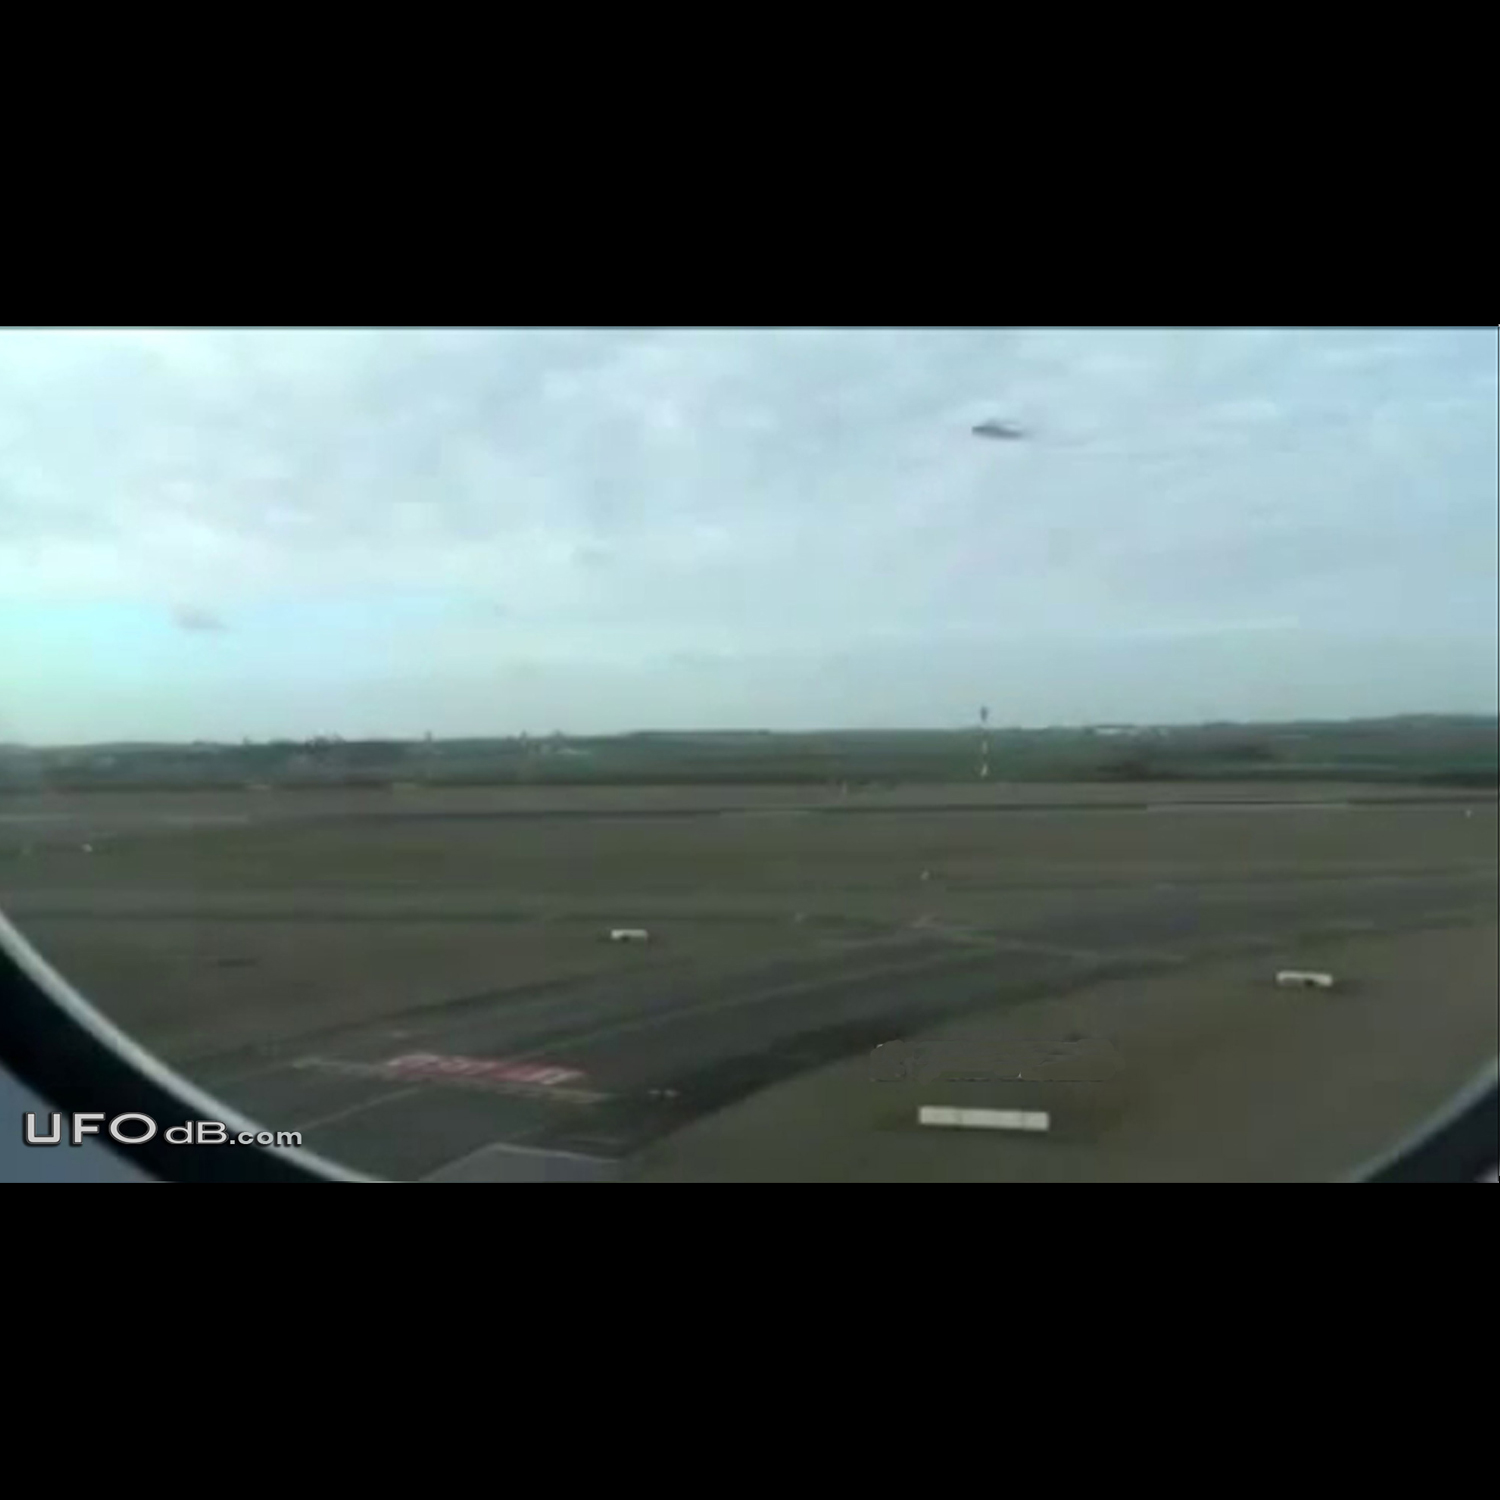 UFO picture from plane taking off Paris Charles de Gaulle airport 2013 UFO Picture #541-2